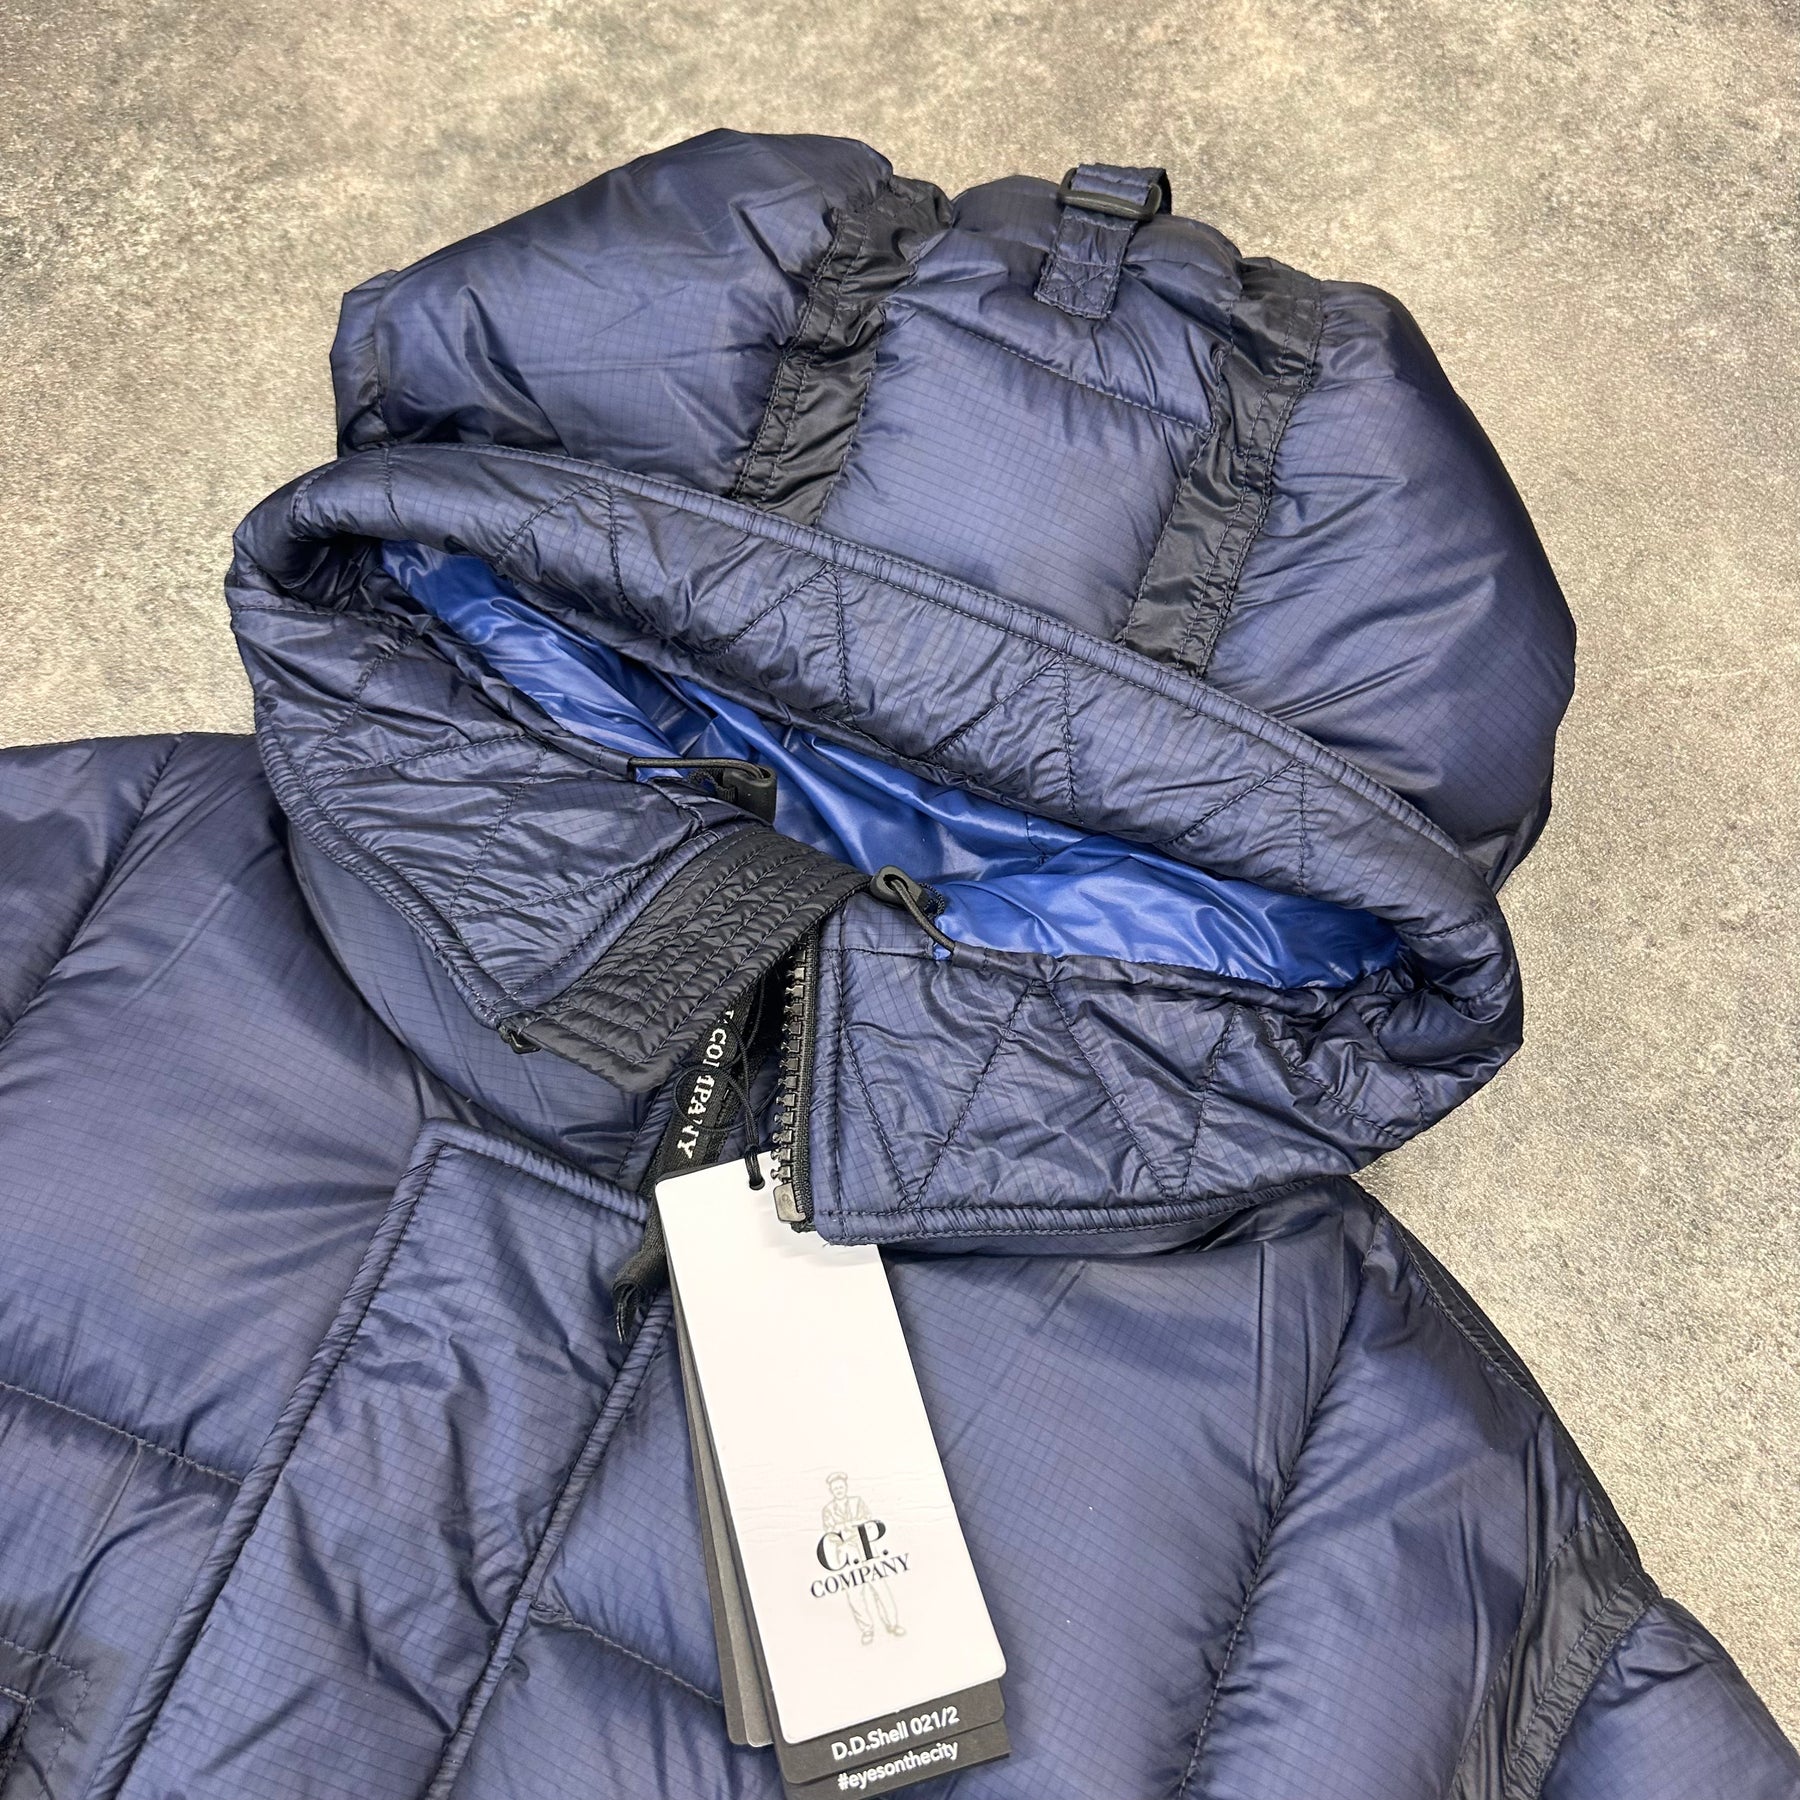 CP COMPANY DD SHELL GOGGLE HOODED PUFFER JACKET NAVY BLUE